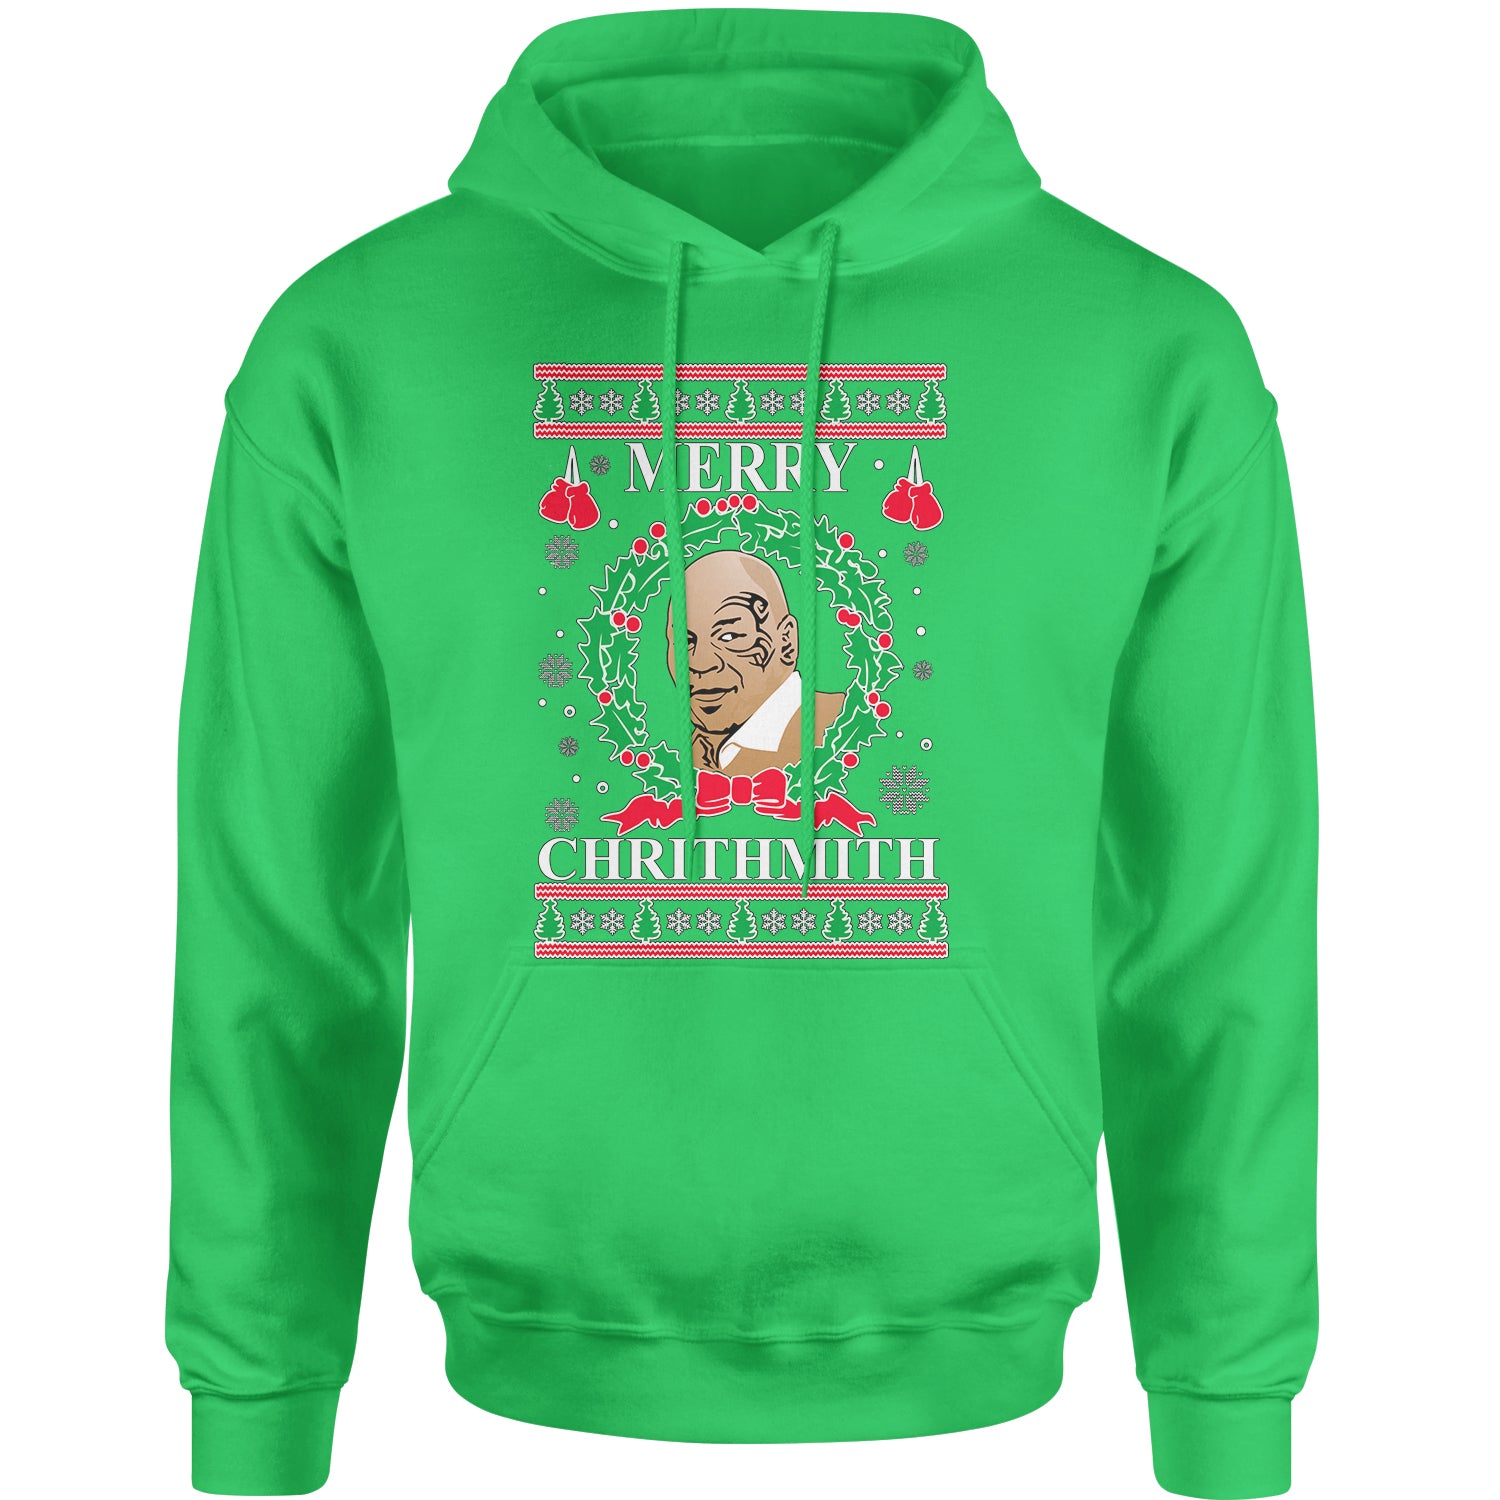 Merry Chrithmith Ugly Christmas Adult Hoodie Sweatshirt christmas, holiday, michael, mike, sweater, tyson, ugly by Expression Tees